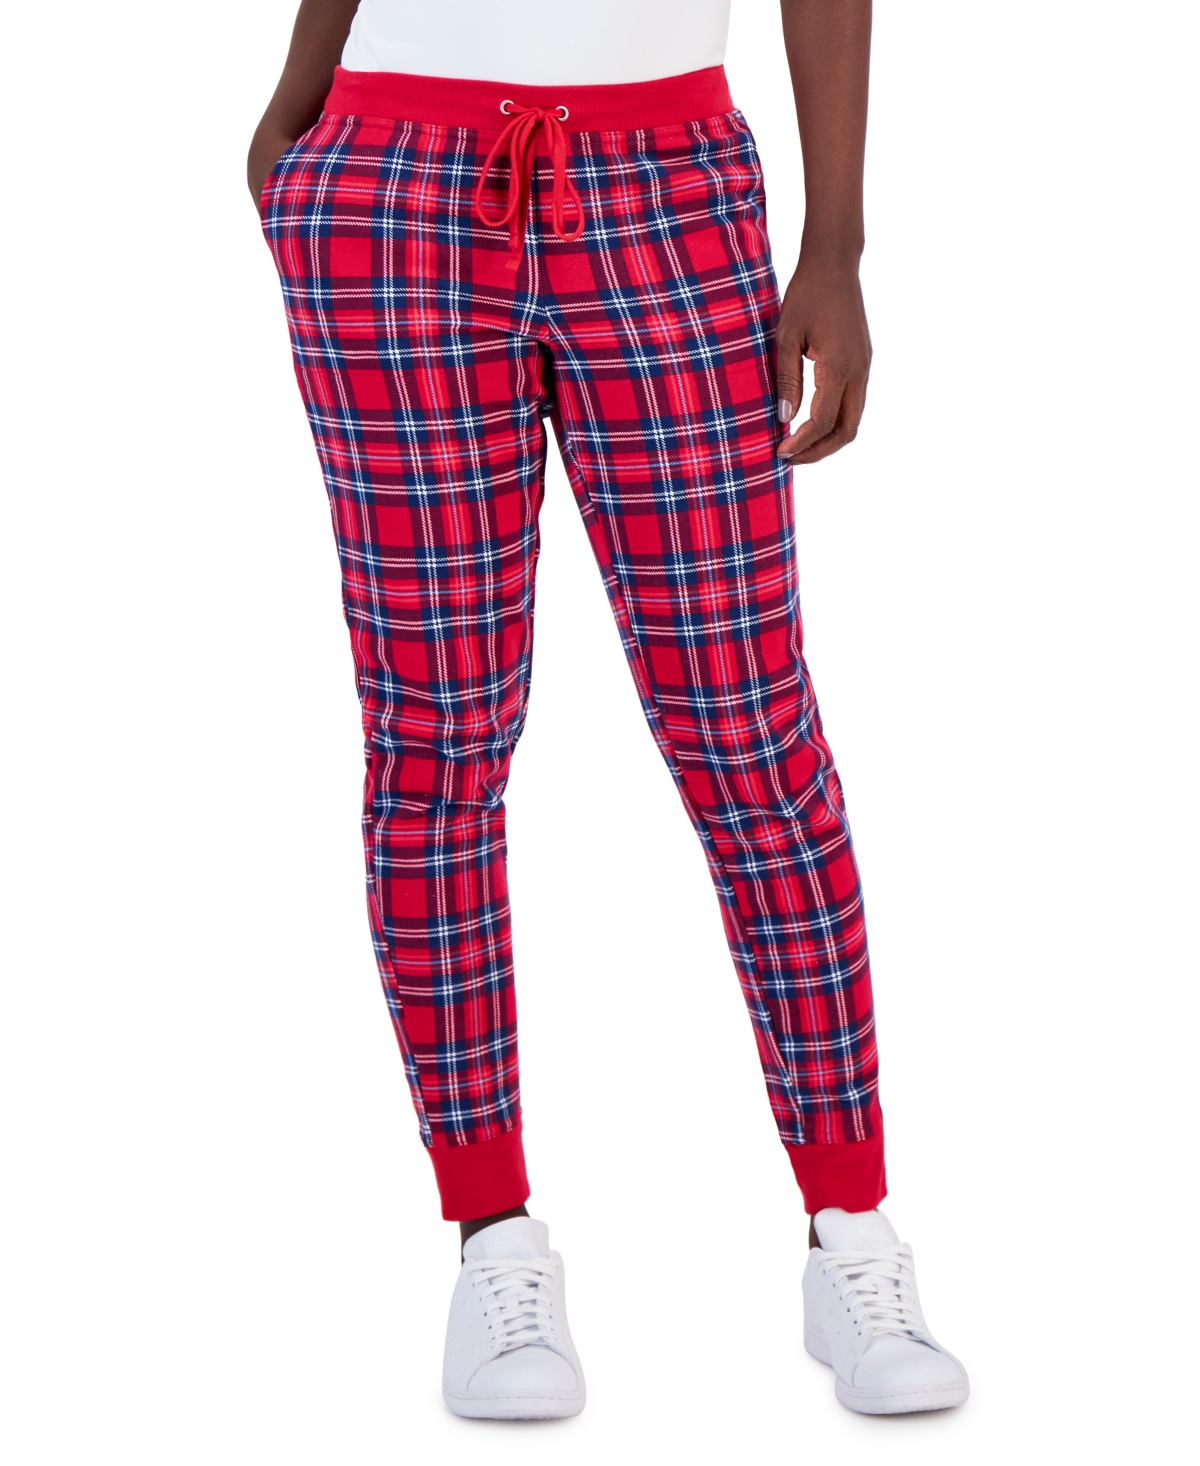 Charter Club Women's Printed Plaid Matching Jogger Pants, Created for Macy's